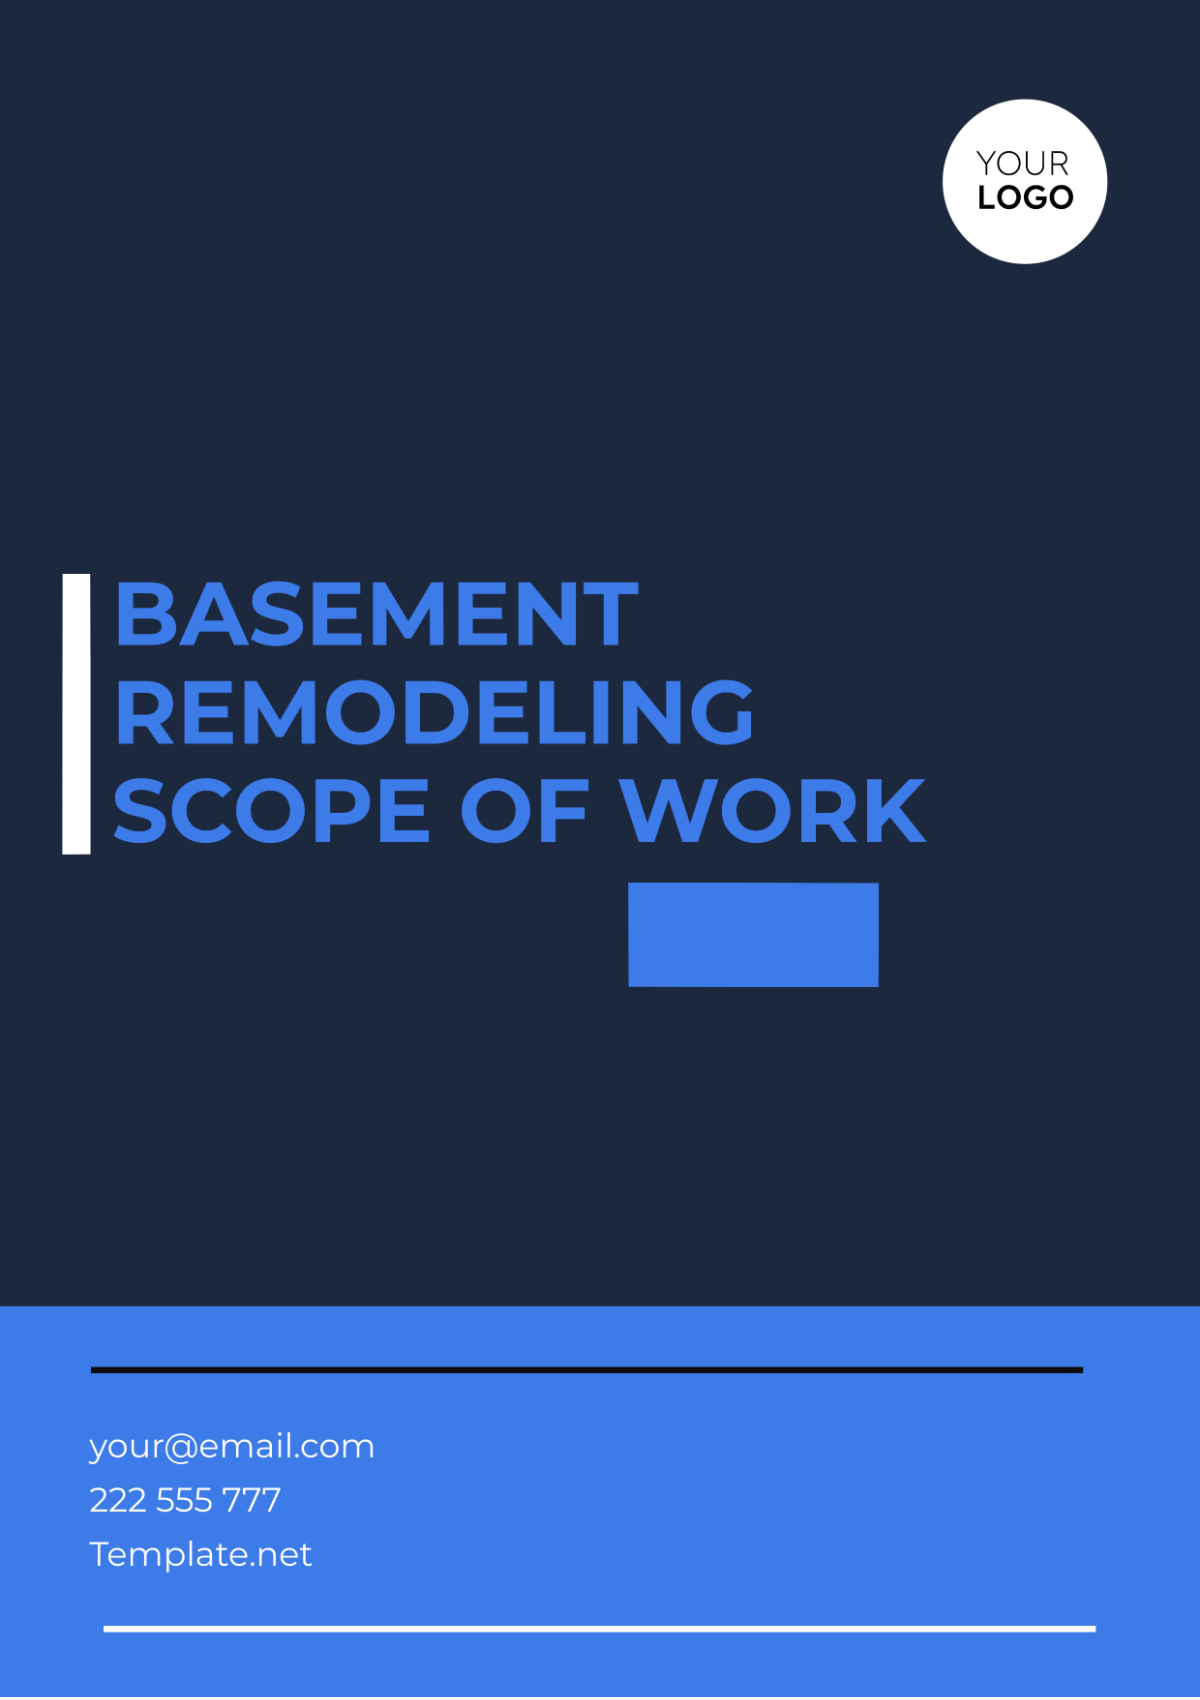 Basement Remodeling Scope of Work Template